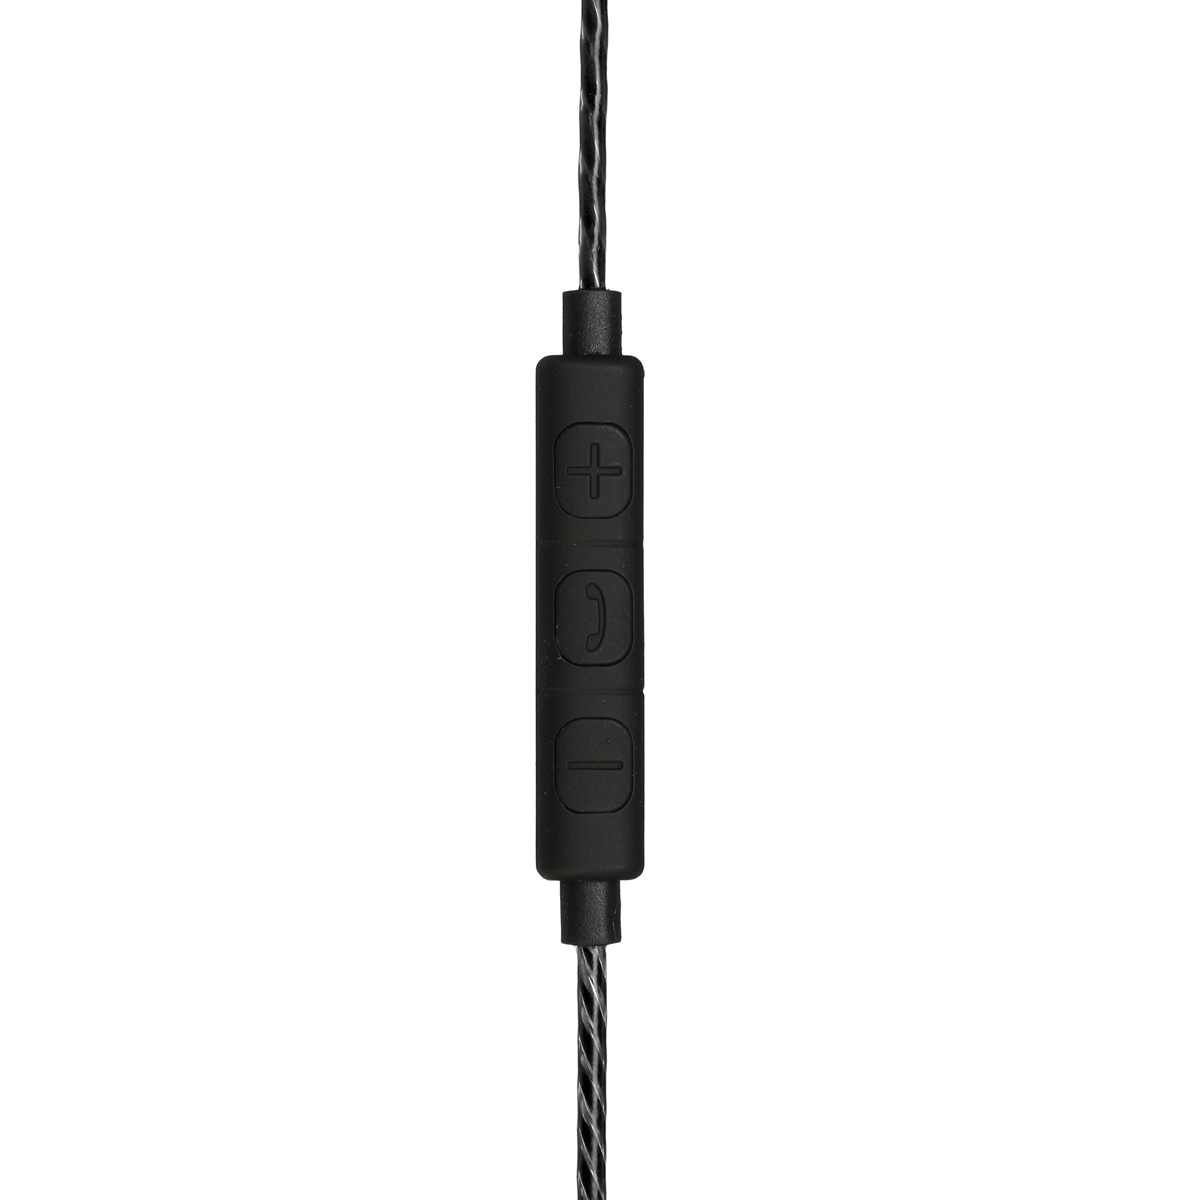 Replacement-Nylon-Flexural-12m-Audio-Cable-with-Microphone-for-Sol-Republic-Master-Tracks-HD-V8-V10--1460109-10